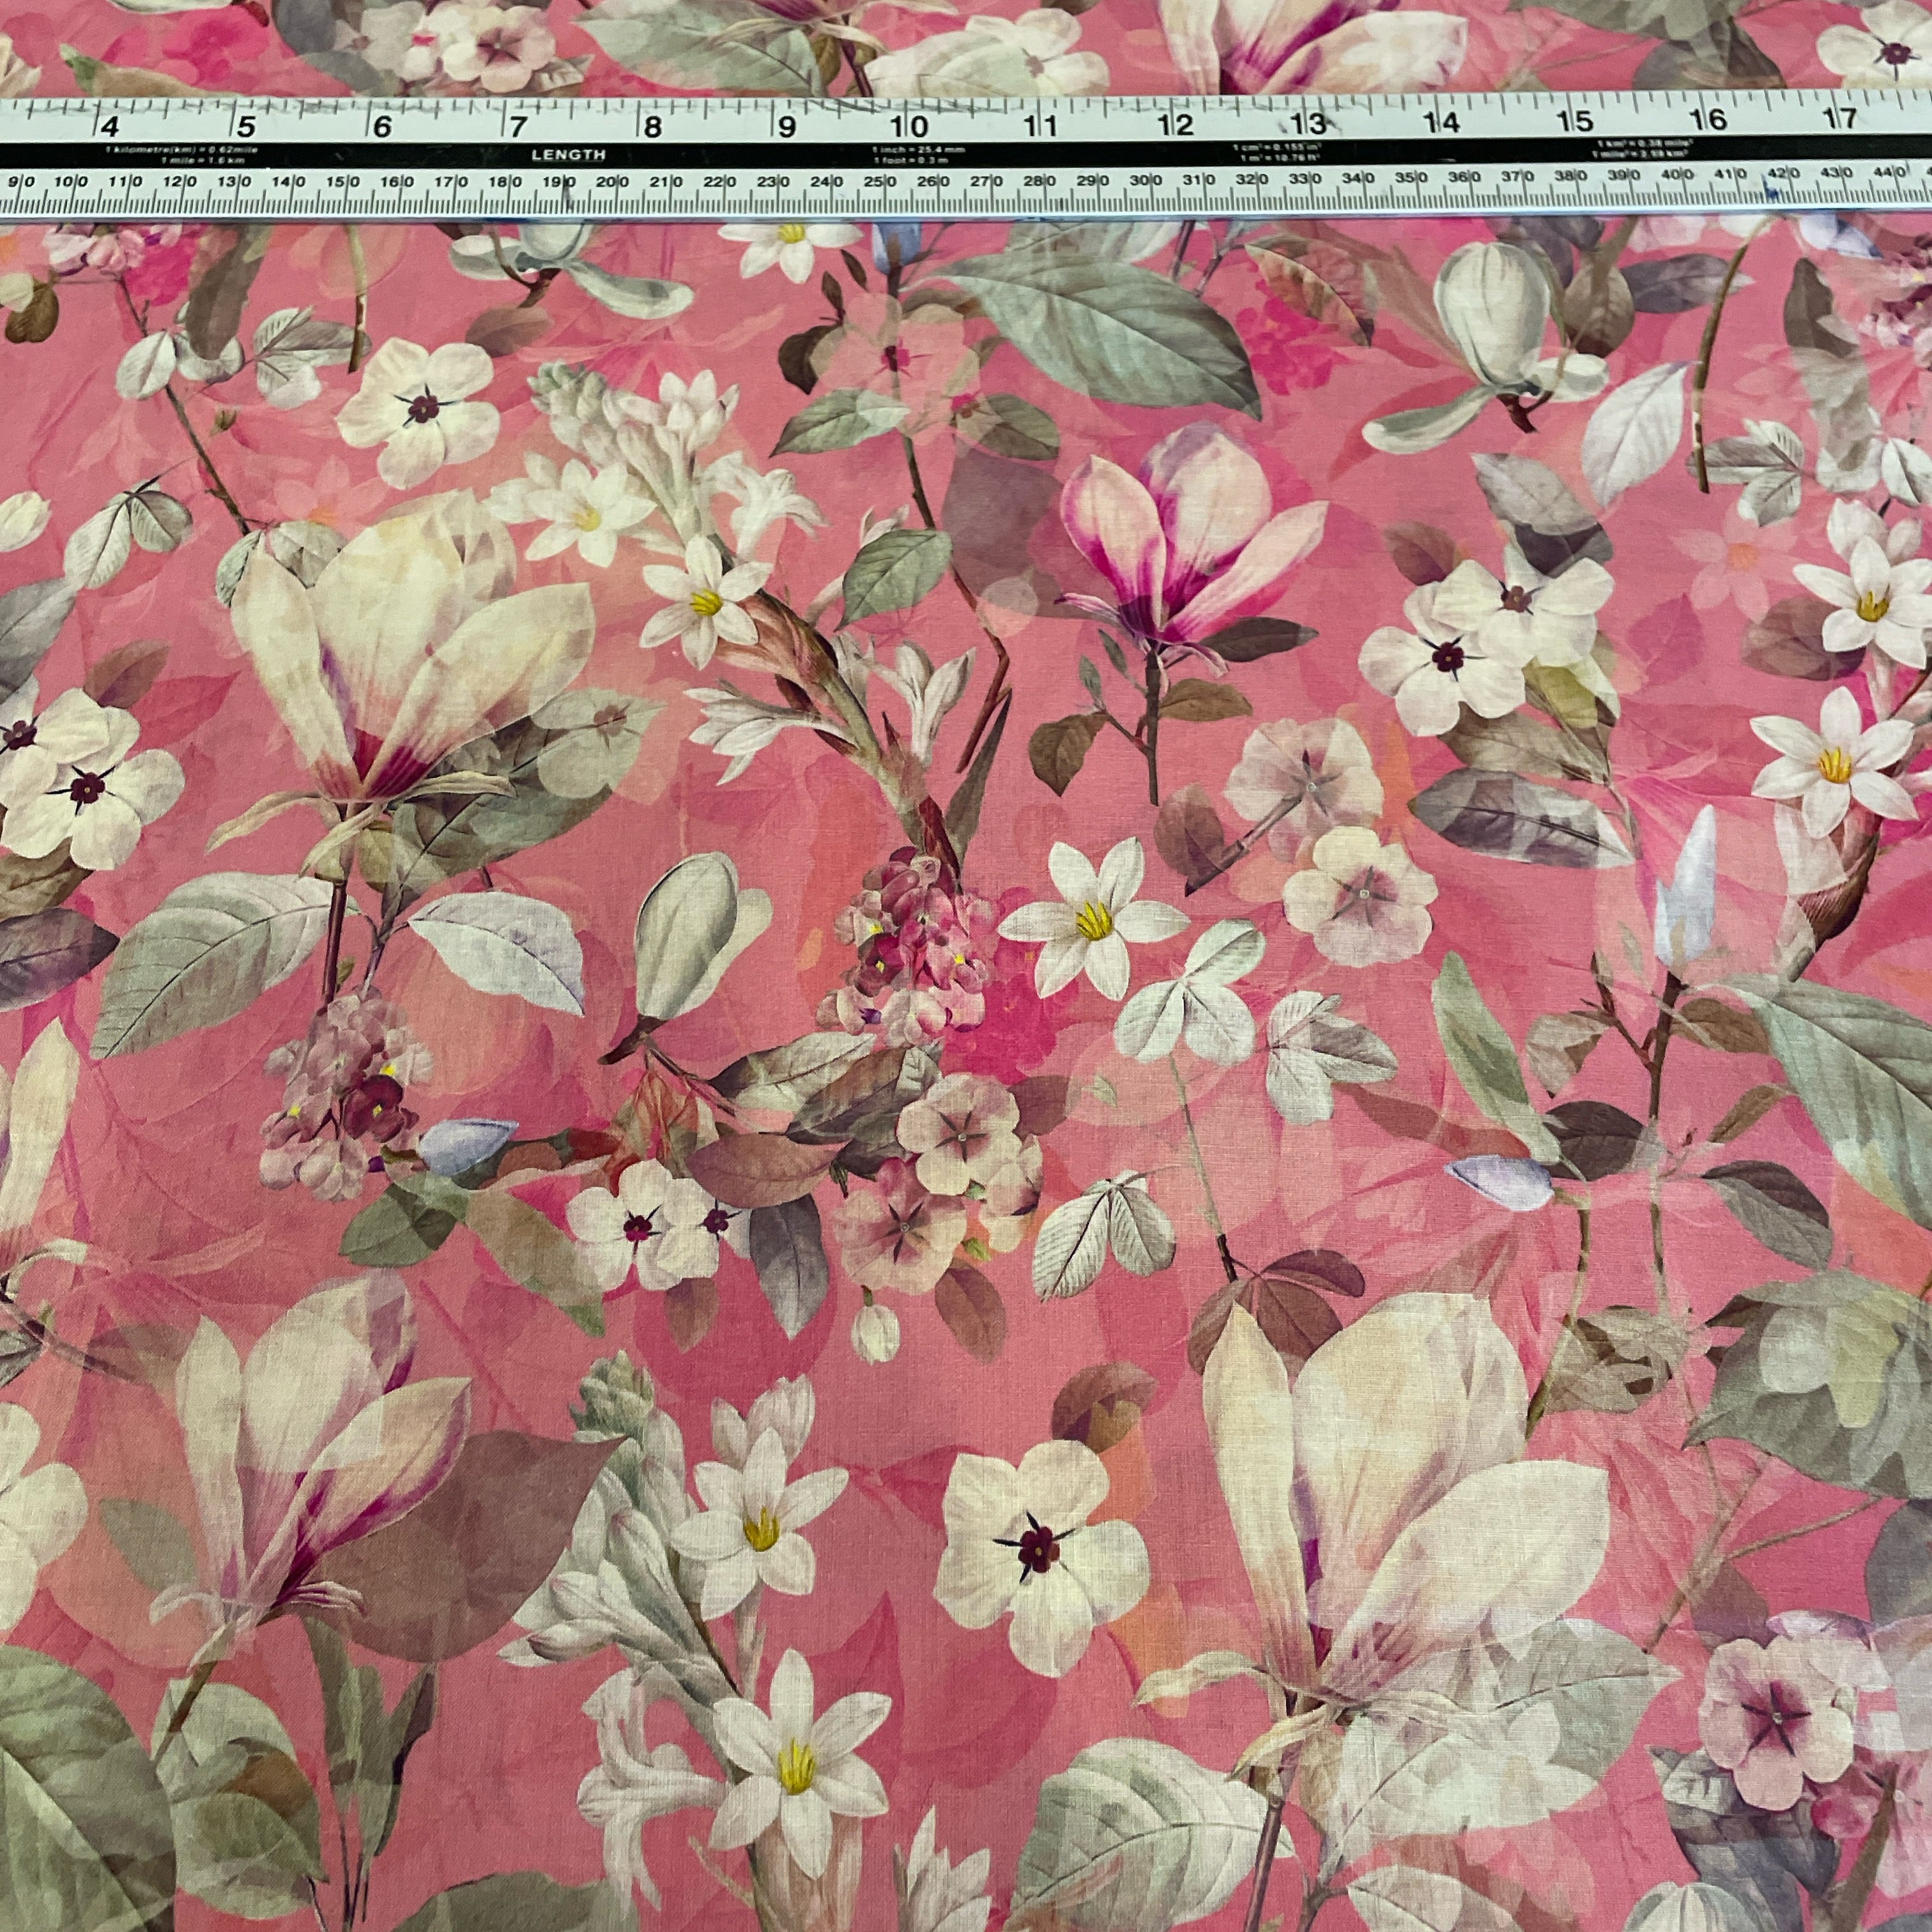 Luxurious rose pink Digital Cotton Lawn floral prints are lightweight and soft with beautiful drape – perfect for dresses, blouses, skirts and crafts. At a width of 135cm / 53" and a weight of 75gsm